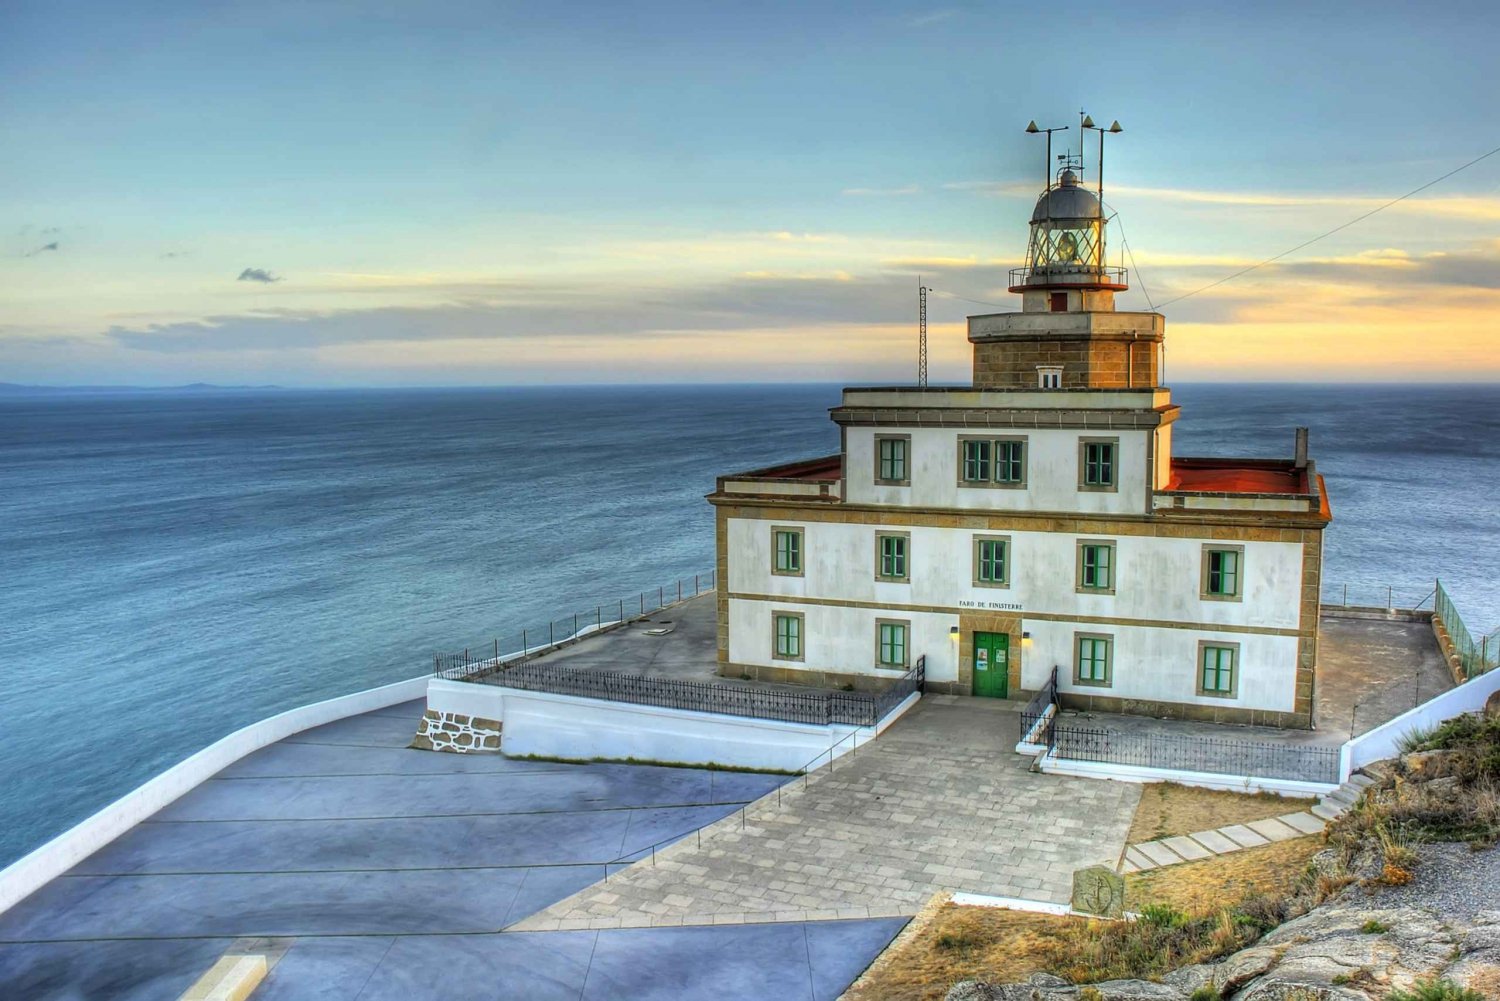 From Santiago: Tour to Finisterre and Muxia - Tour Express